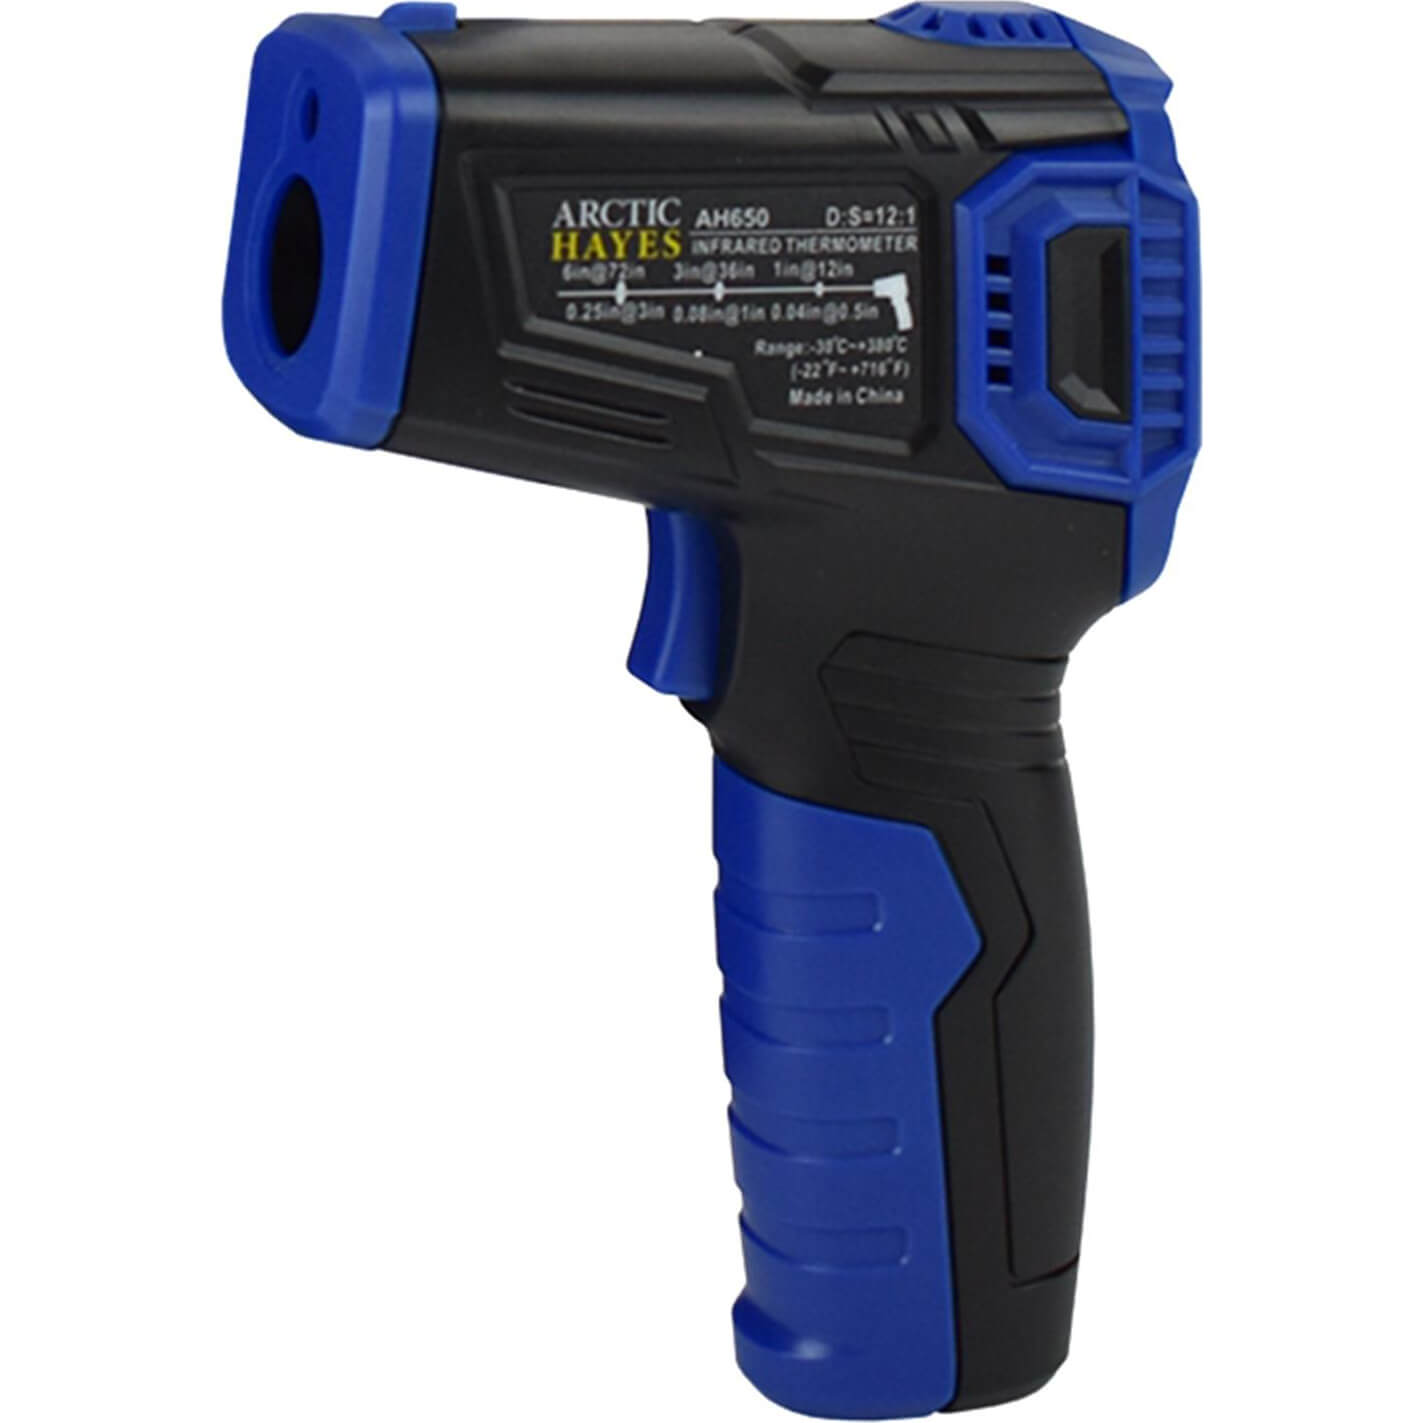 Arctic Hayes Non-Contact Infrared Digital Thermometer